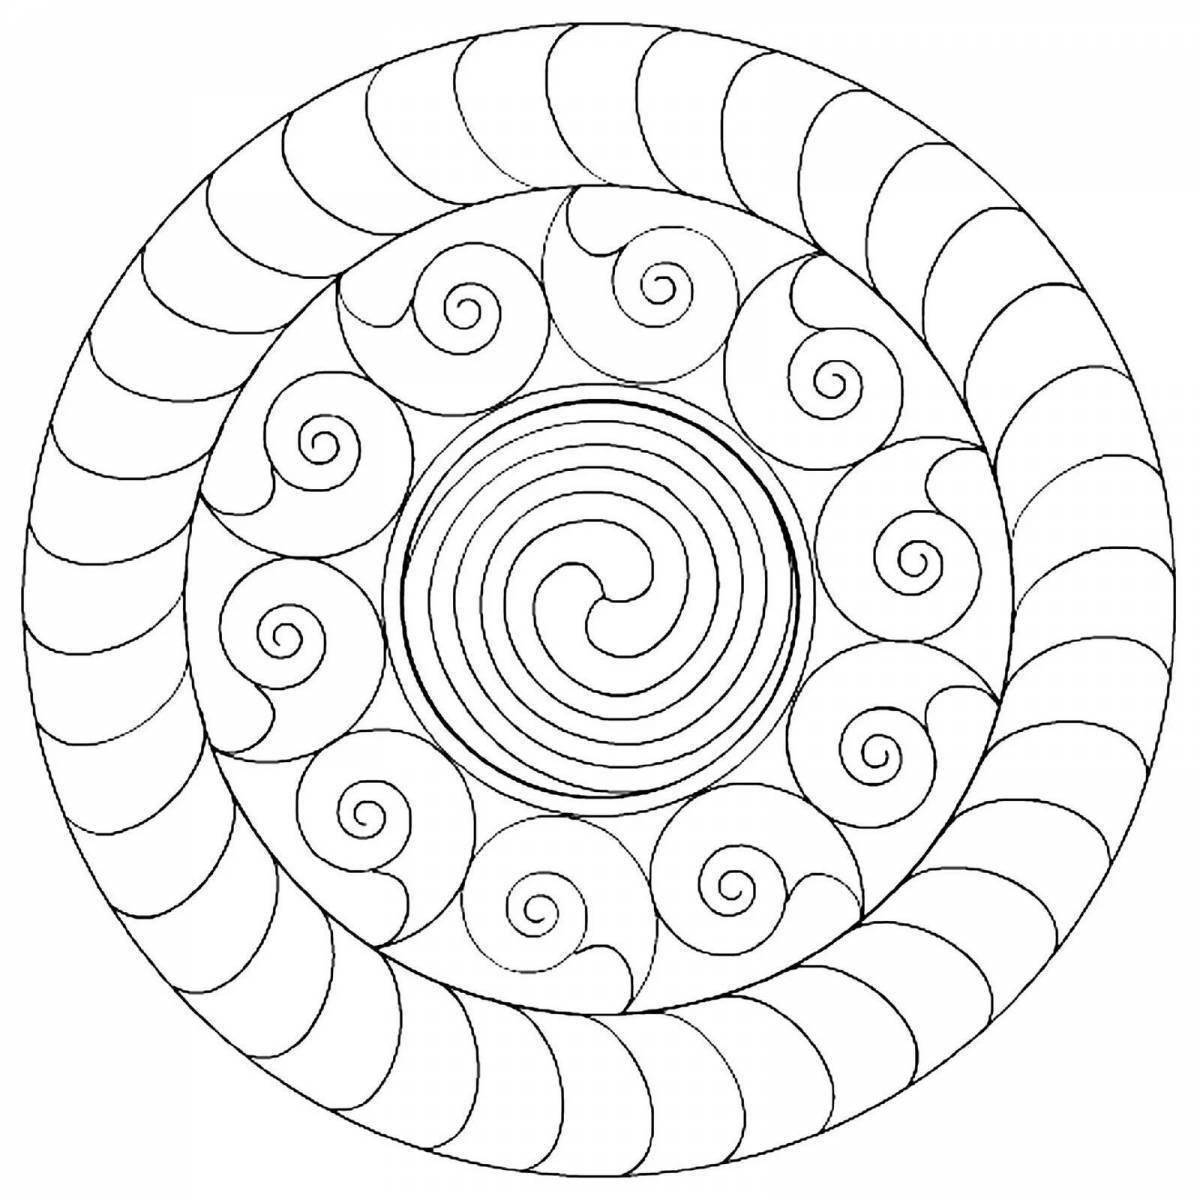 Charming spiral coloring page